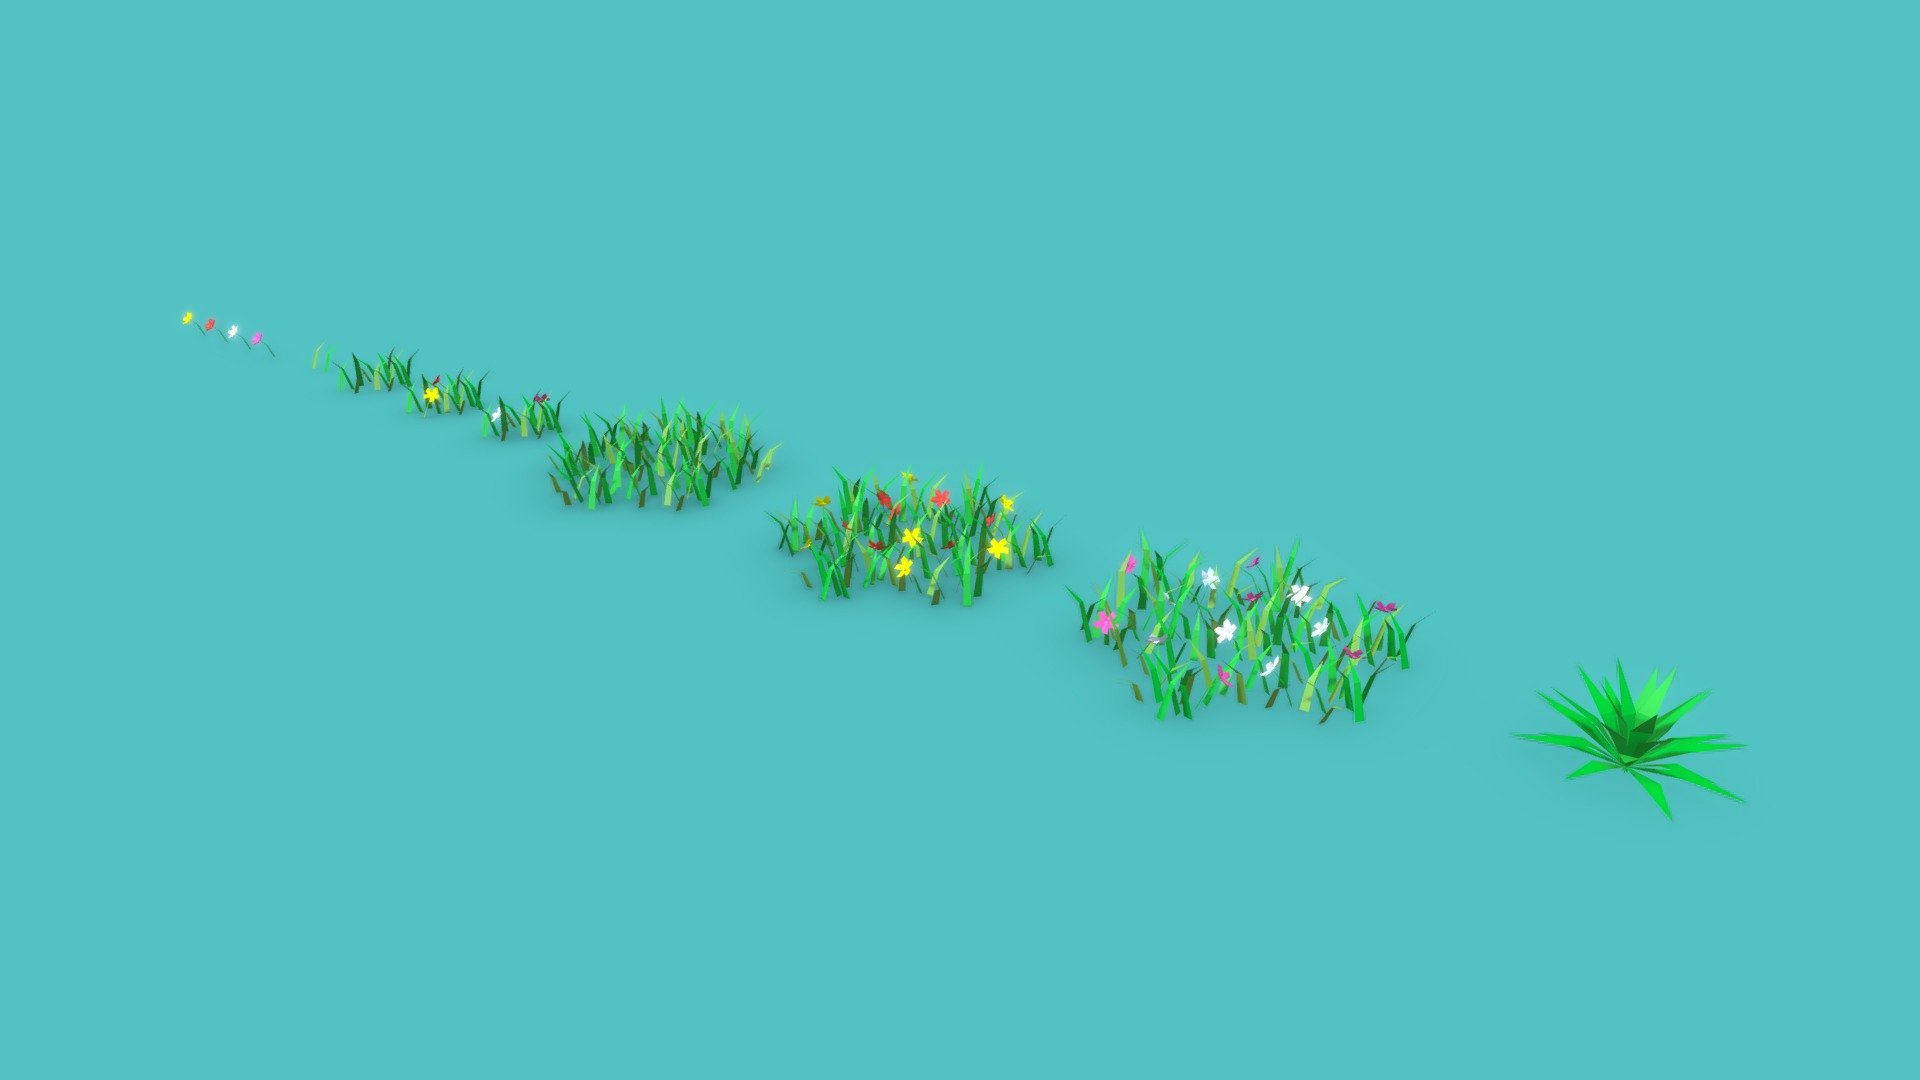 This is a low-poly environment asset pack with a variety of grasses and flowers. All models use a single material and texture 3d model